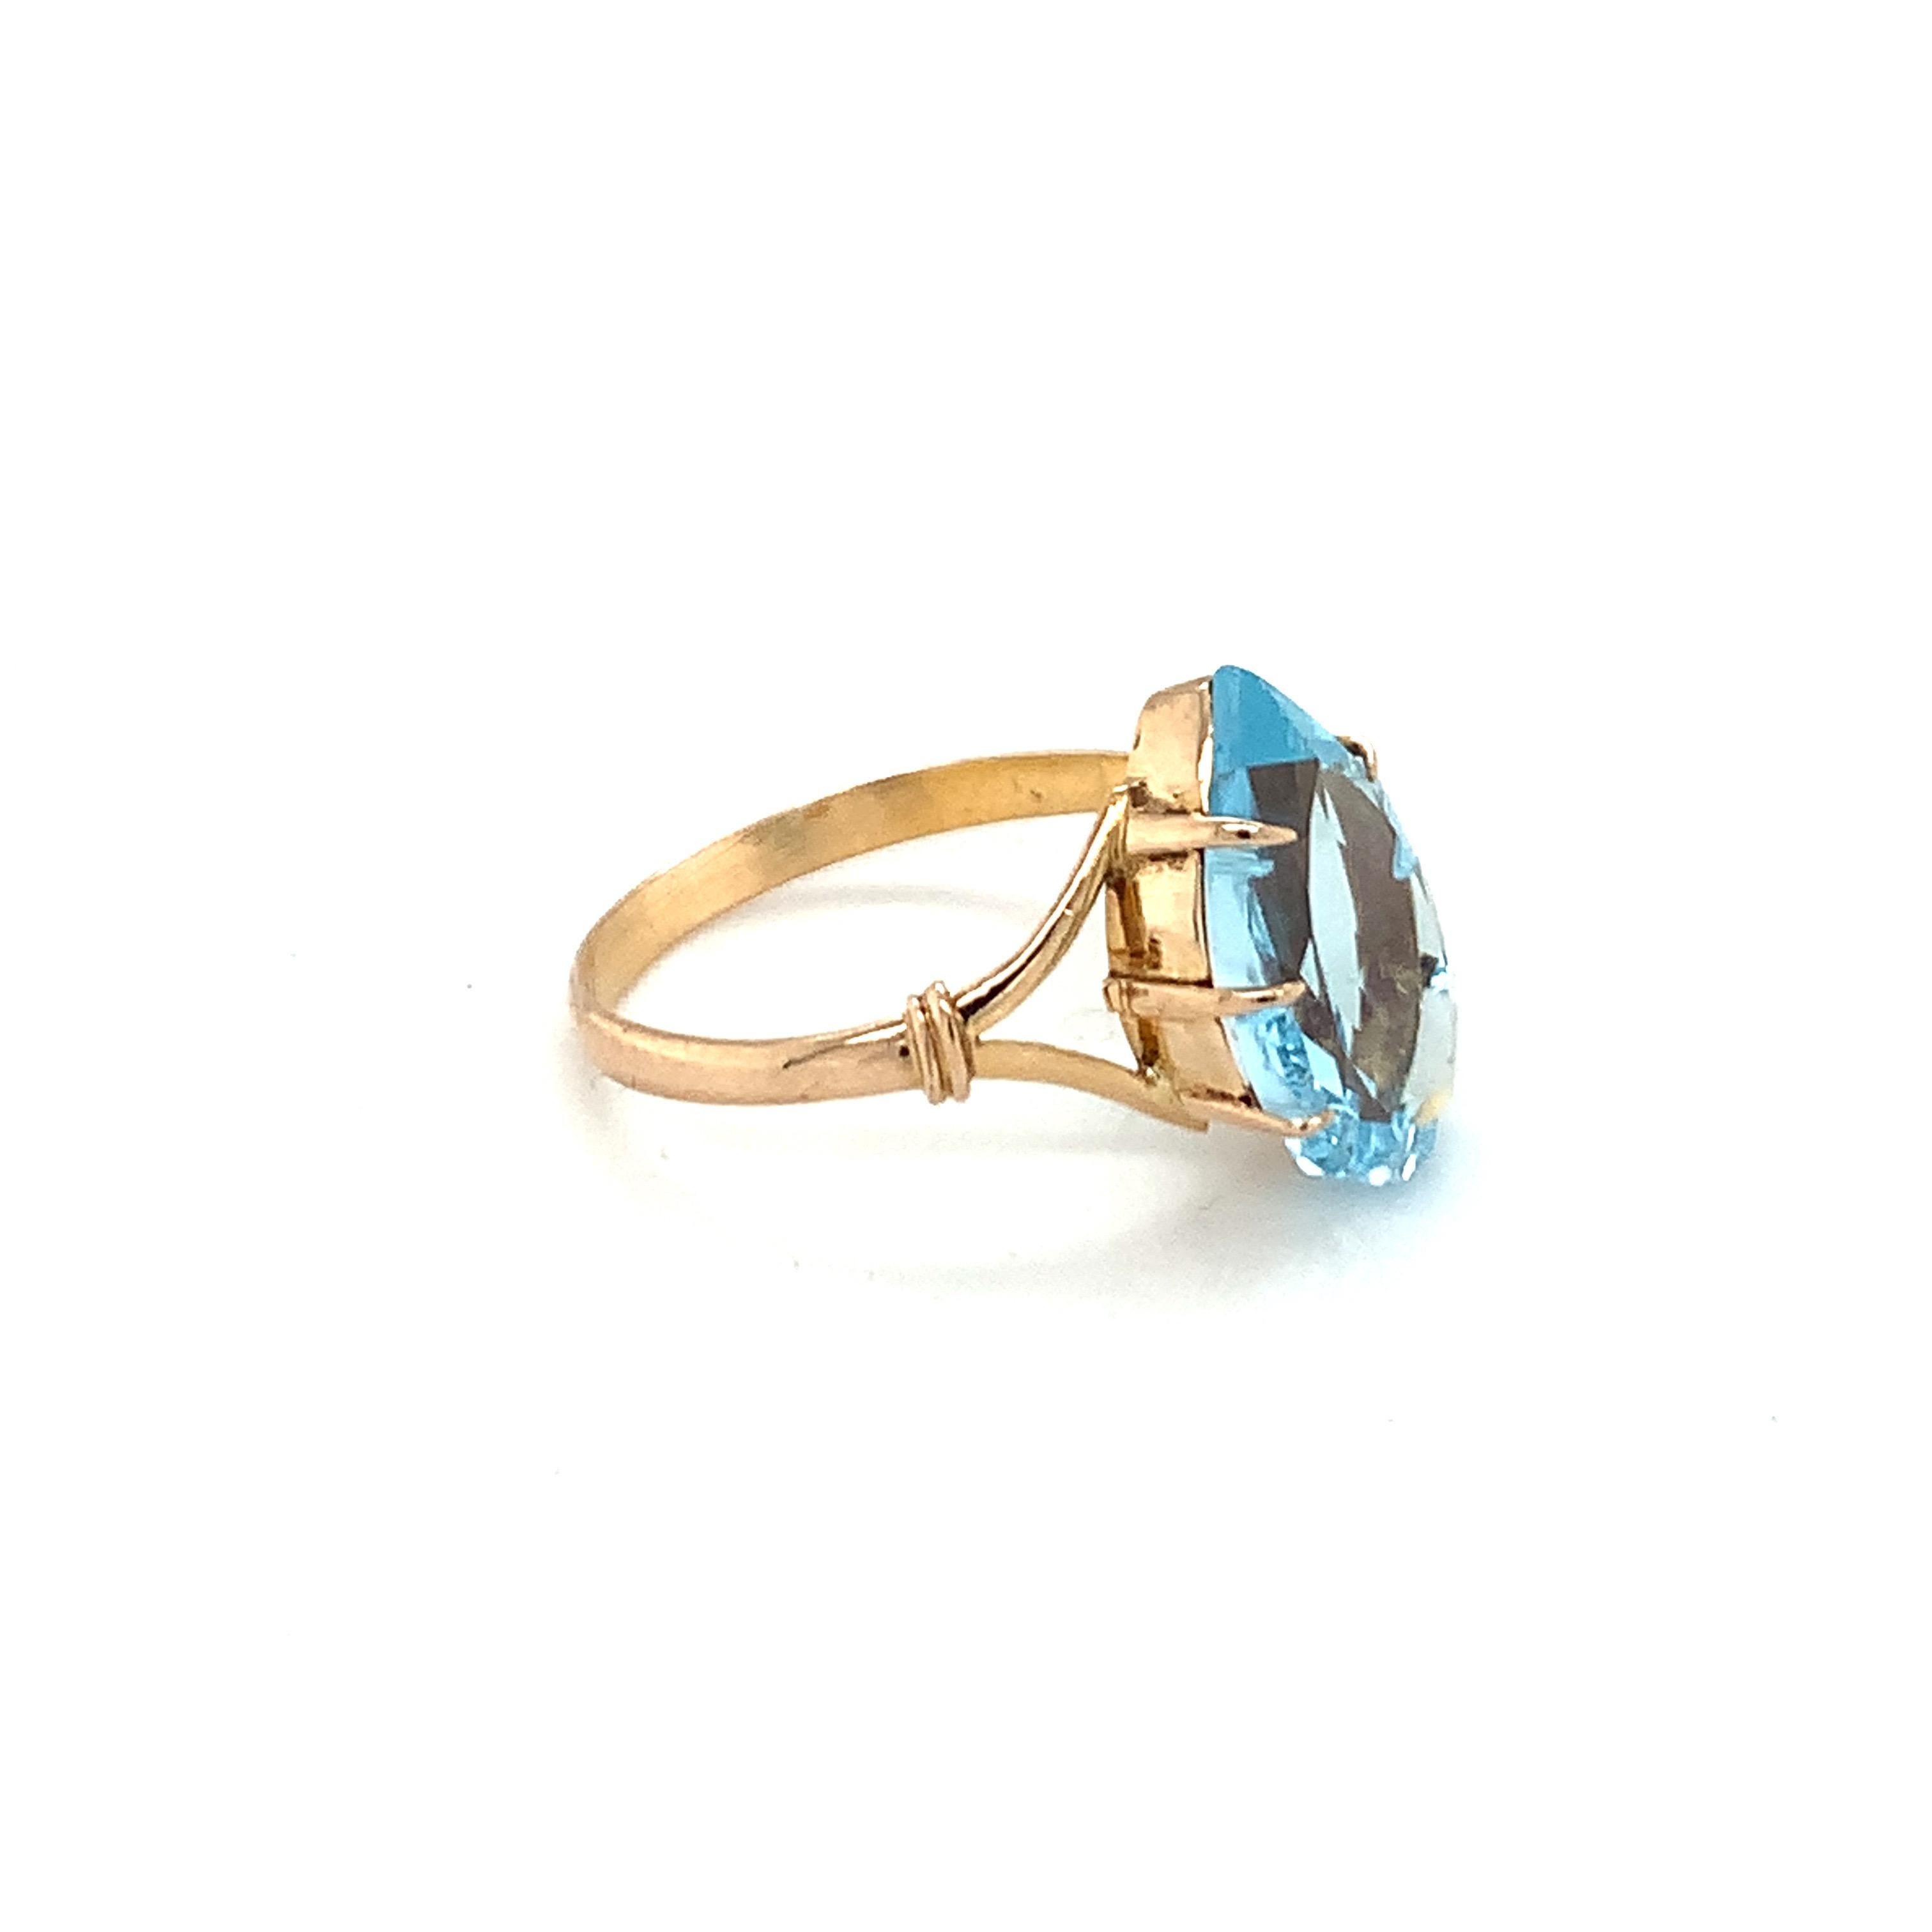 Hand cut and polished blue topaz ring is crafted with hand in 14K yellow gold. 
Ideal for daily casual wear.
Image is enlarged for a closer look
Ethically sourced natural gem stone.